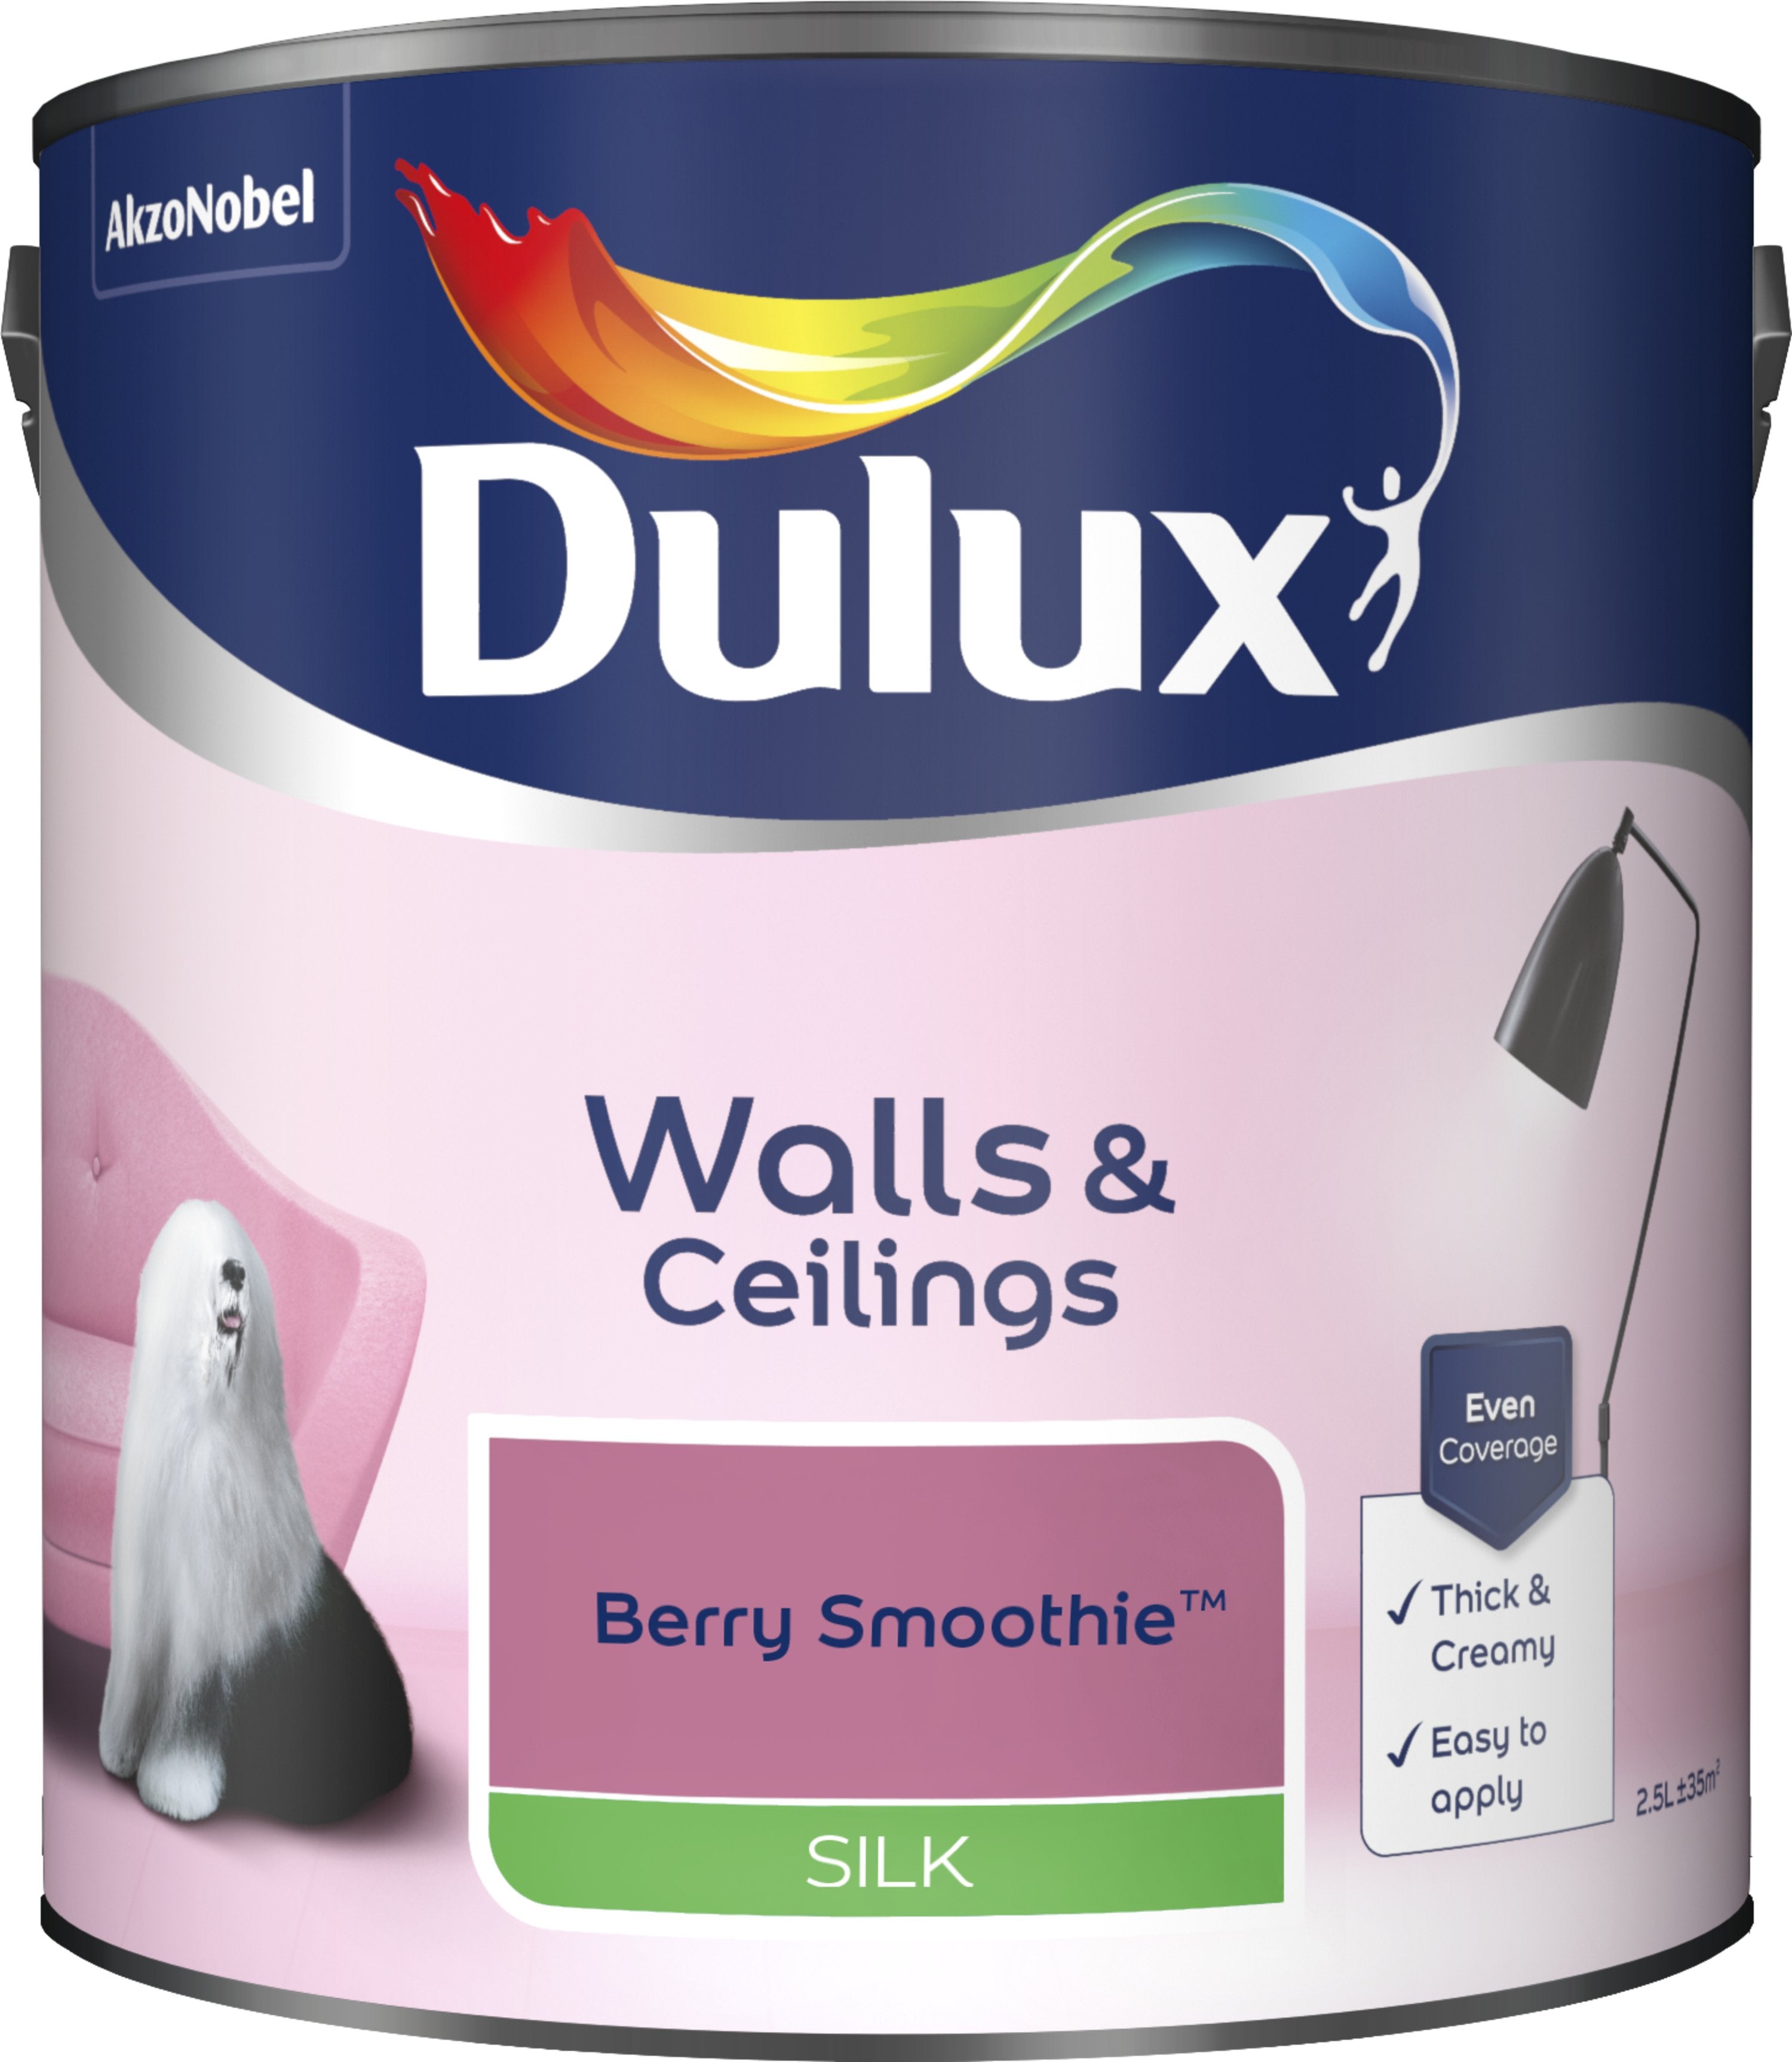 Dulux Silk Emulsion Paint For Walls And Ceilings - Berry Smoothie 2.5L Garden & Diy  Home